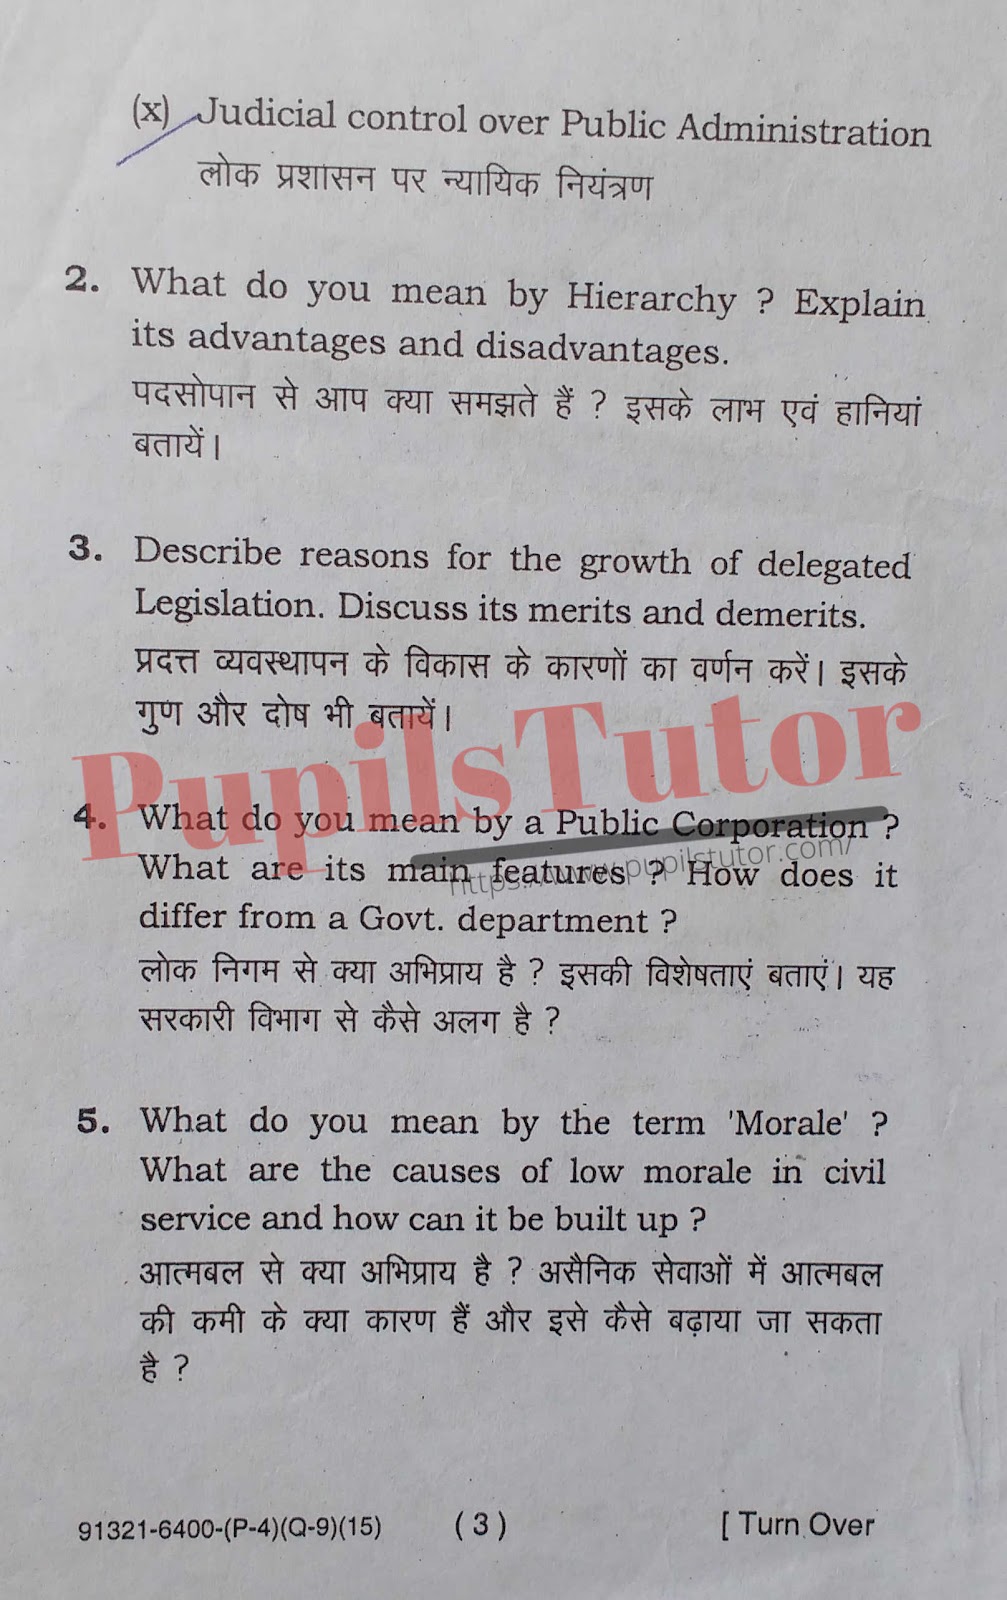 Free Download PDF Of M.D. University B.A. First Year Latest Question Paper For Public Administration Subject (Page 3) - https://www.pupilstutor.com